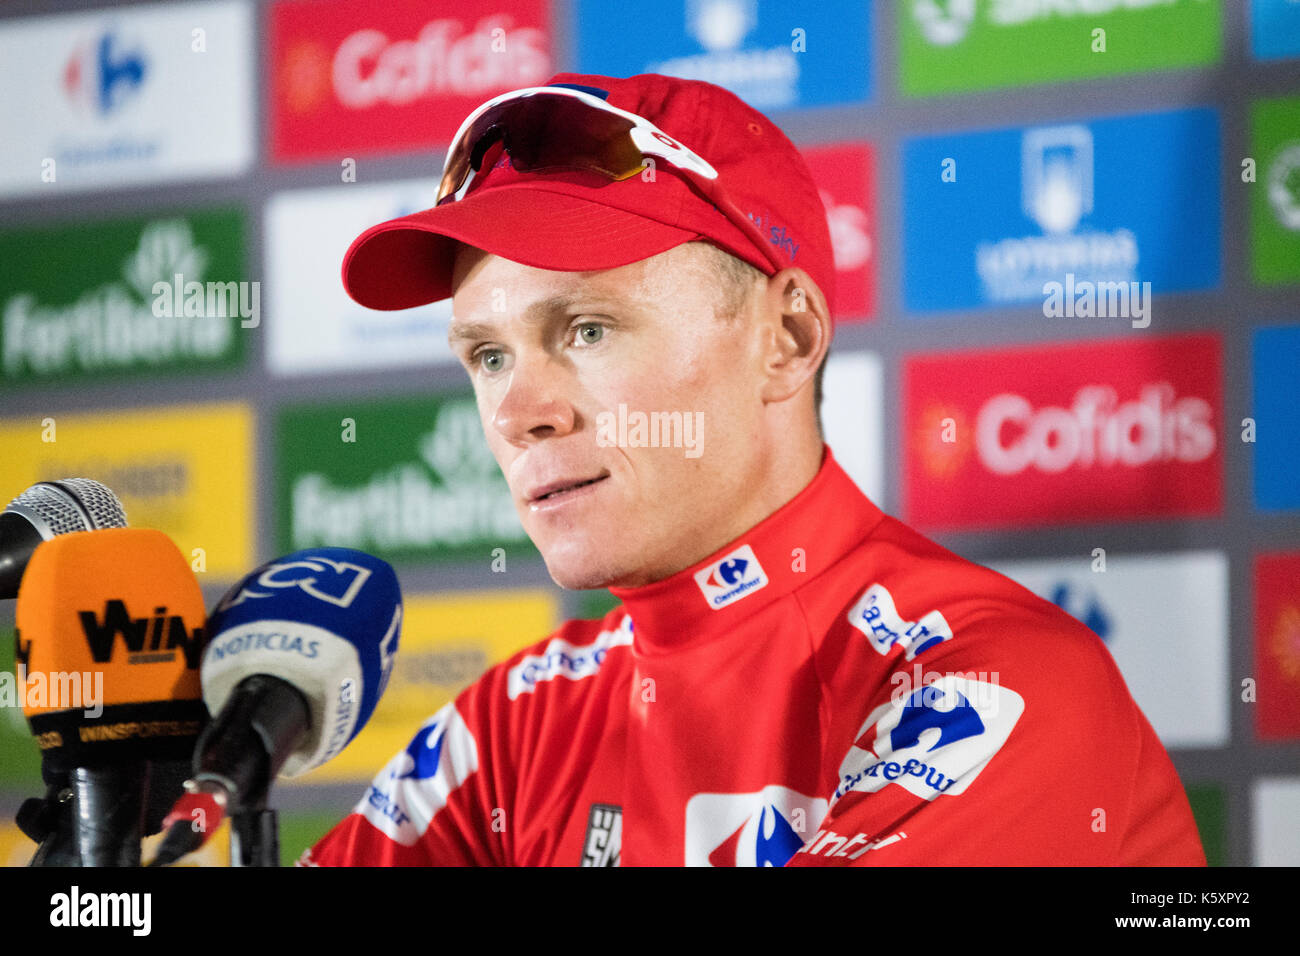 Madrid, Spain. 10th September, 2017. Chris Froome (Team Sky) at the press conference of Tour of Spain (Vuelta a España) between Madrid and Madrid on September 10, 2017 in Madrid, Spain. ©David Gato/Alamy Live News Stock Photo